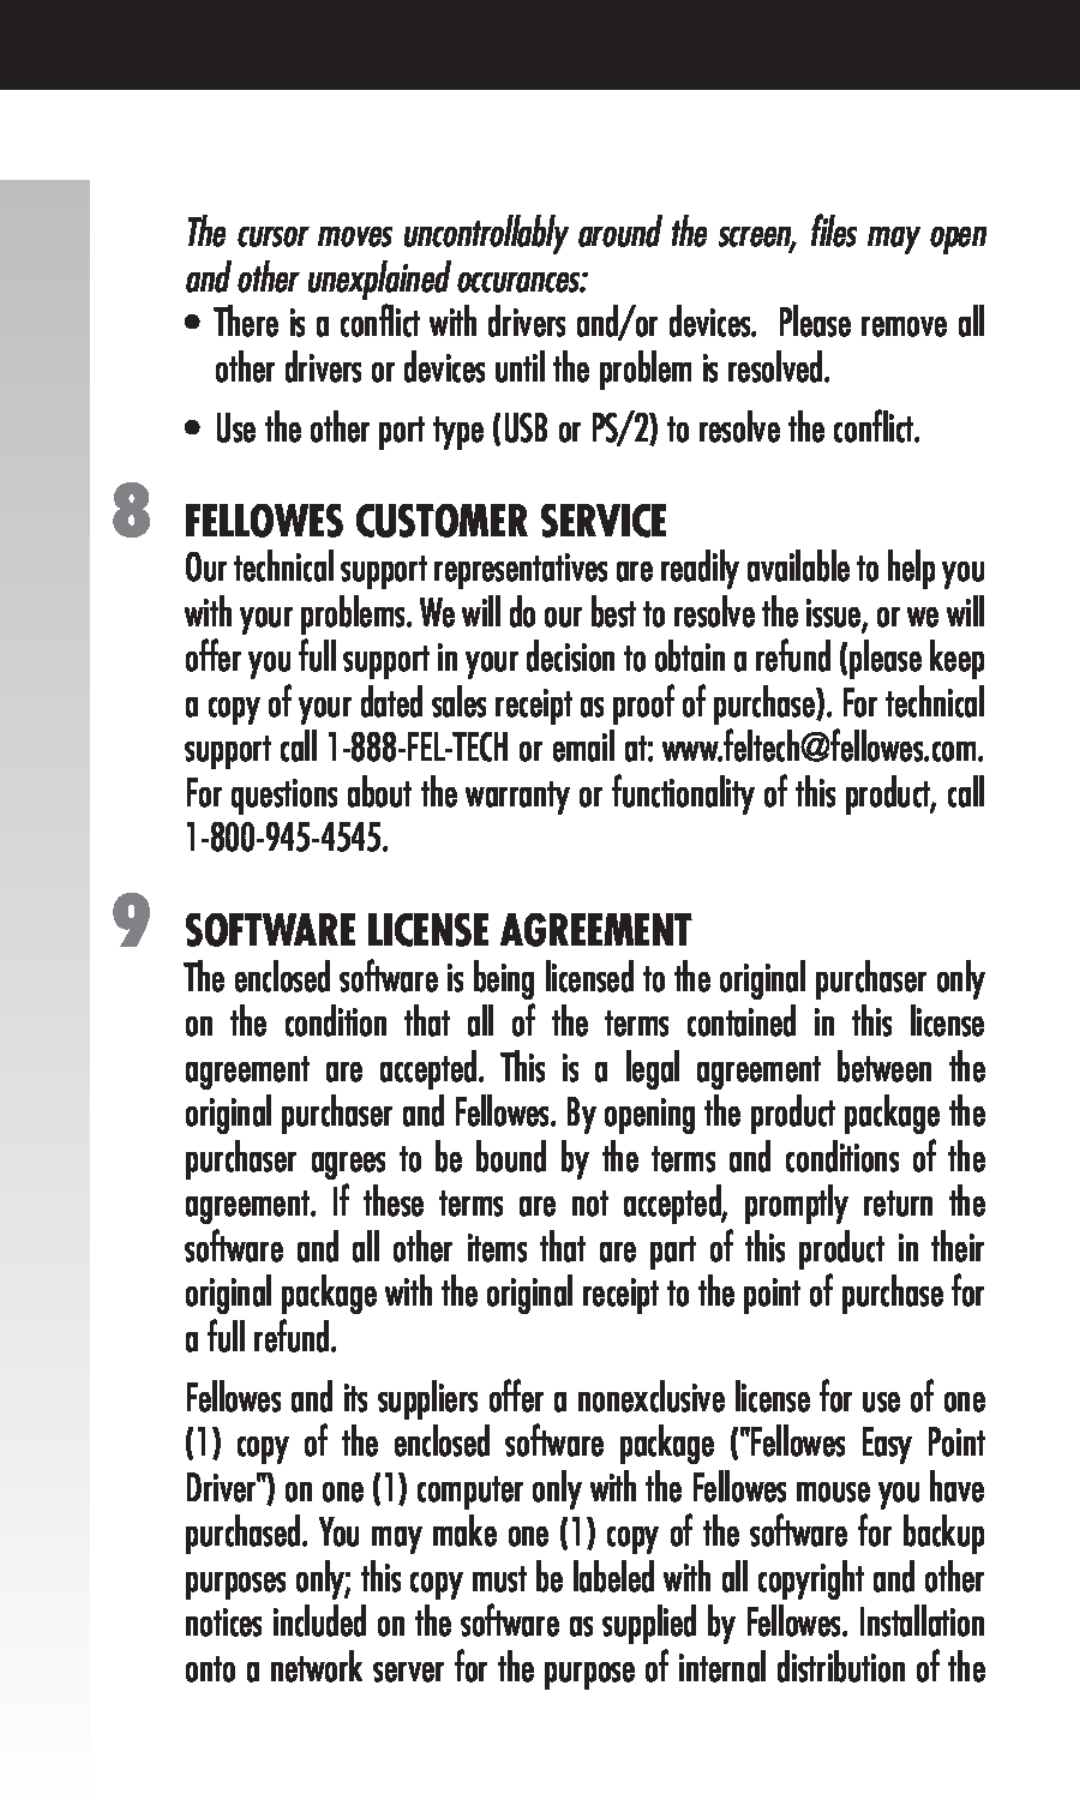 Fellowes Cordless Mouse manual Fellowes Customer Service, Software License Agreement 